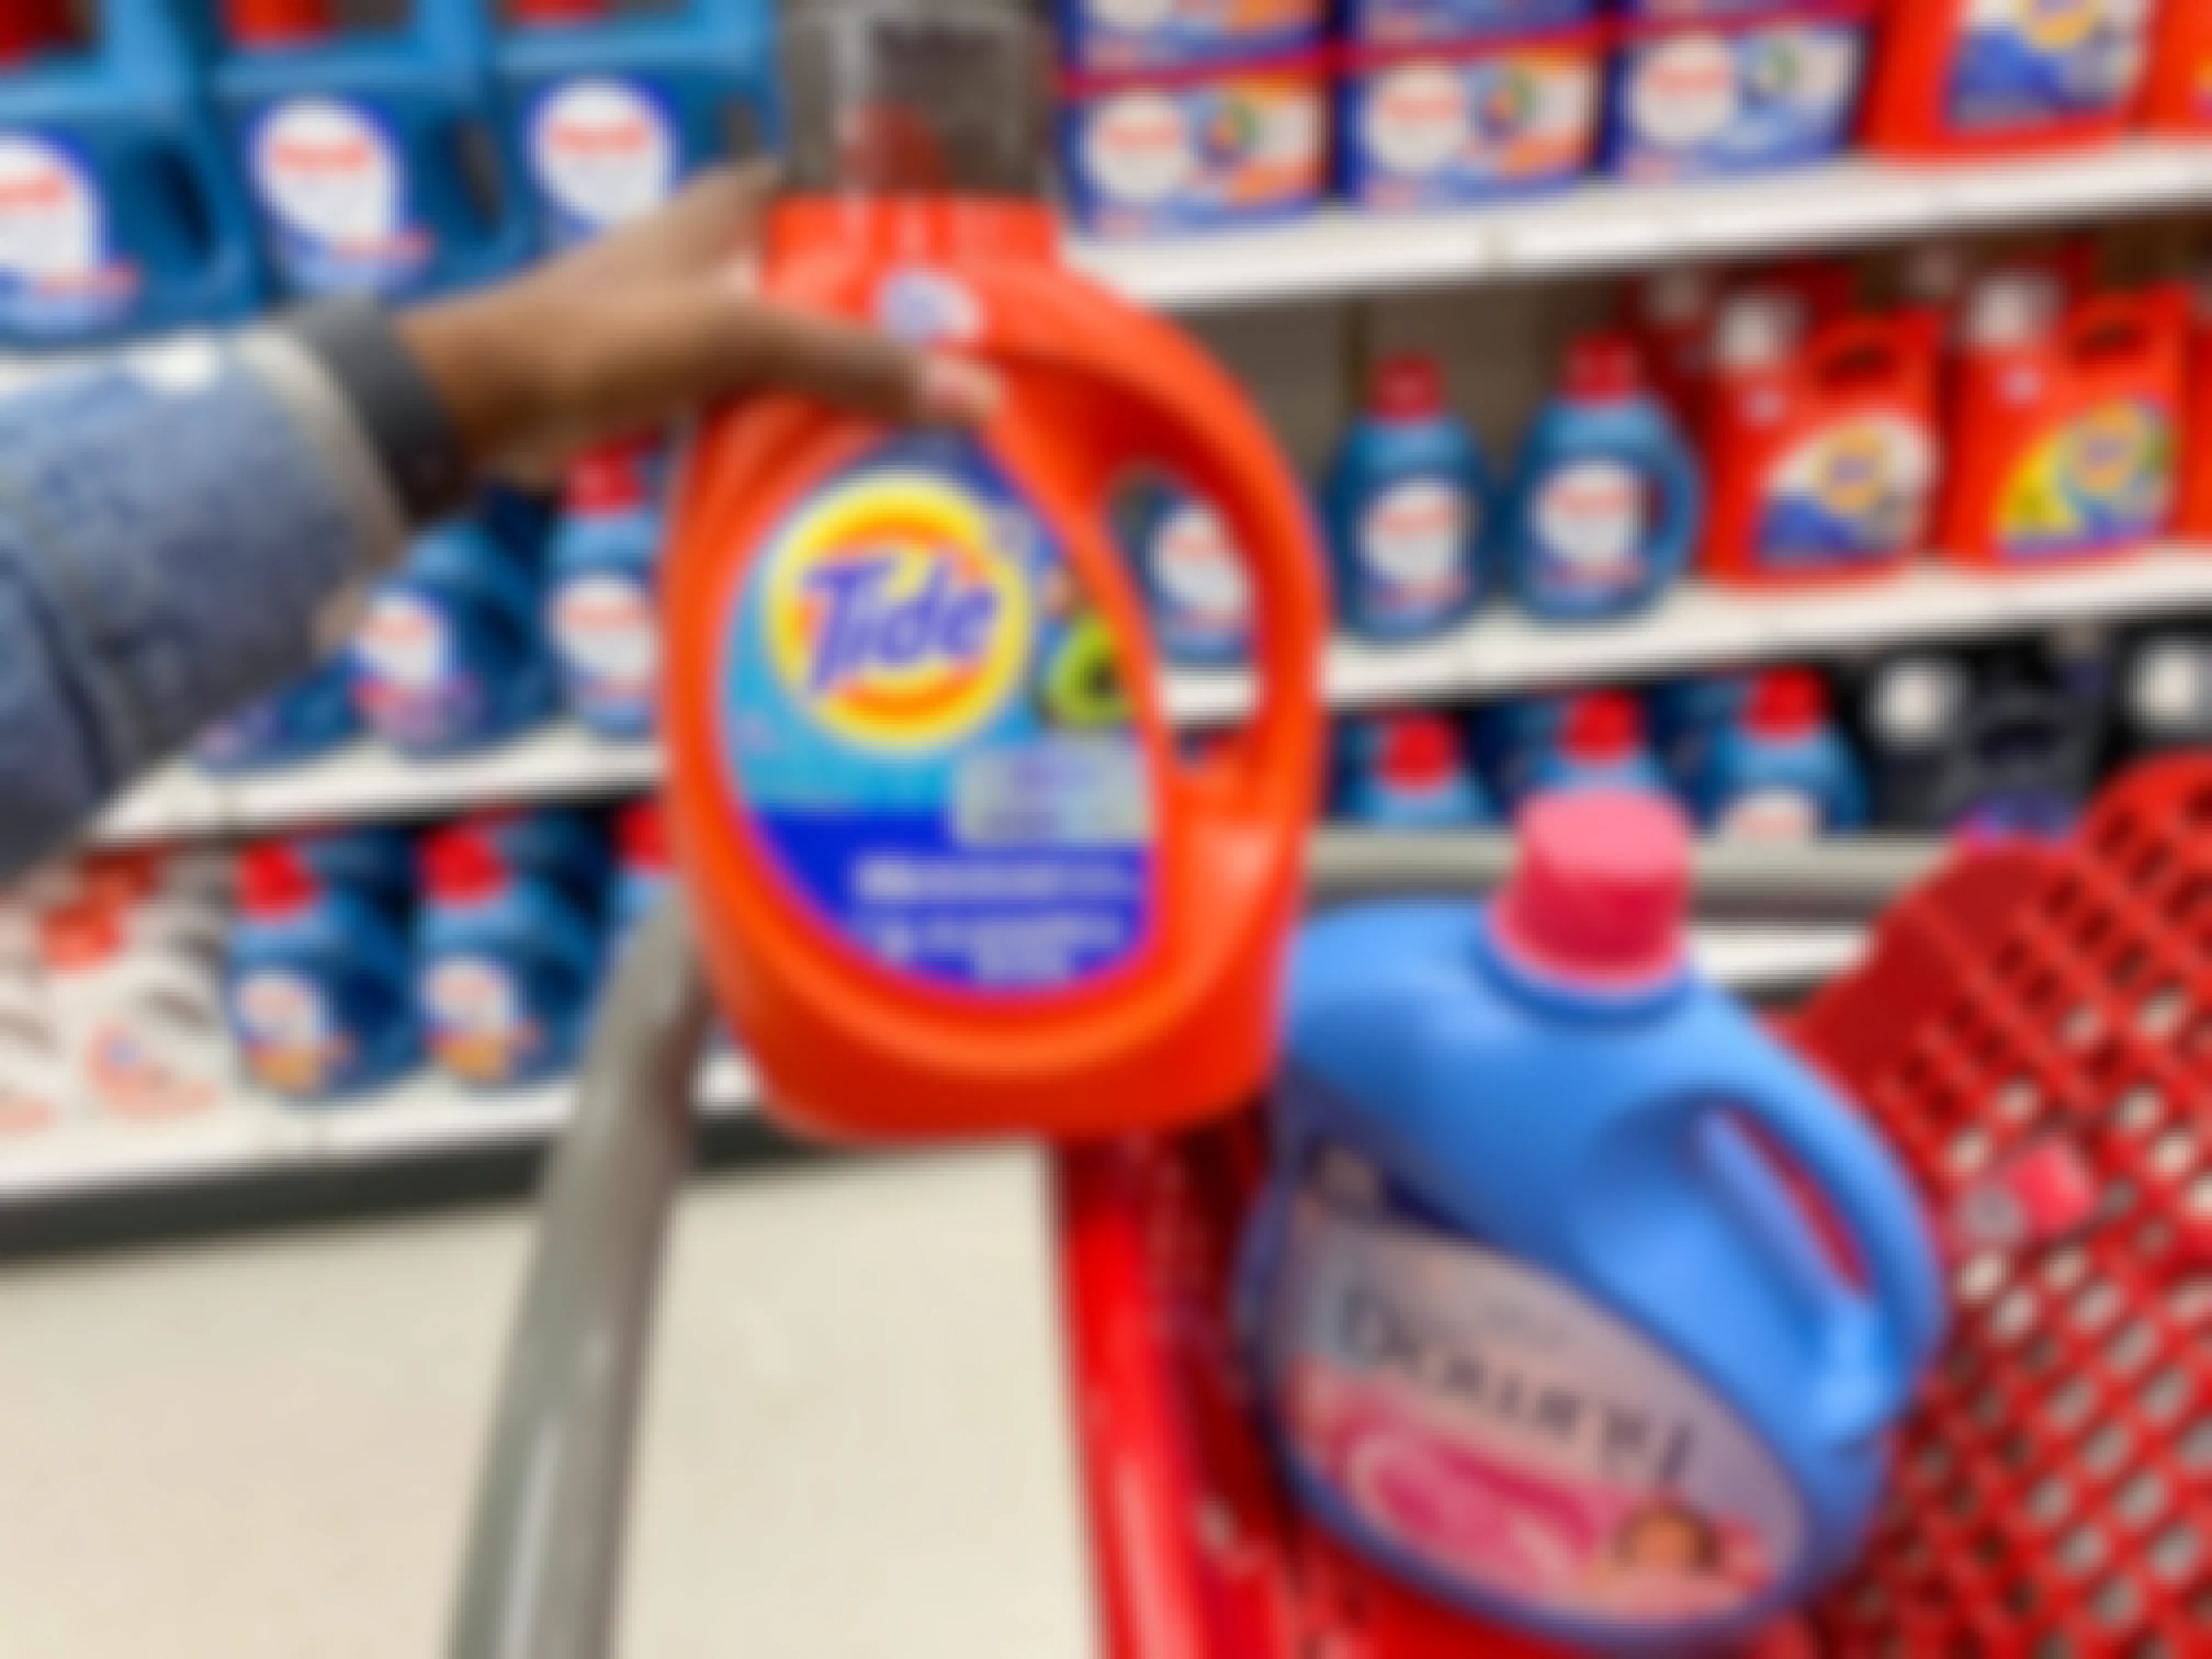 hand holding up Tide detergent over Target shopping cart that has a bottle of Downy in it